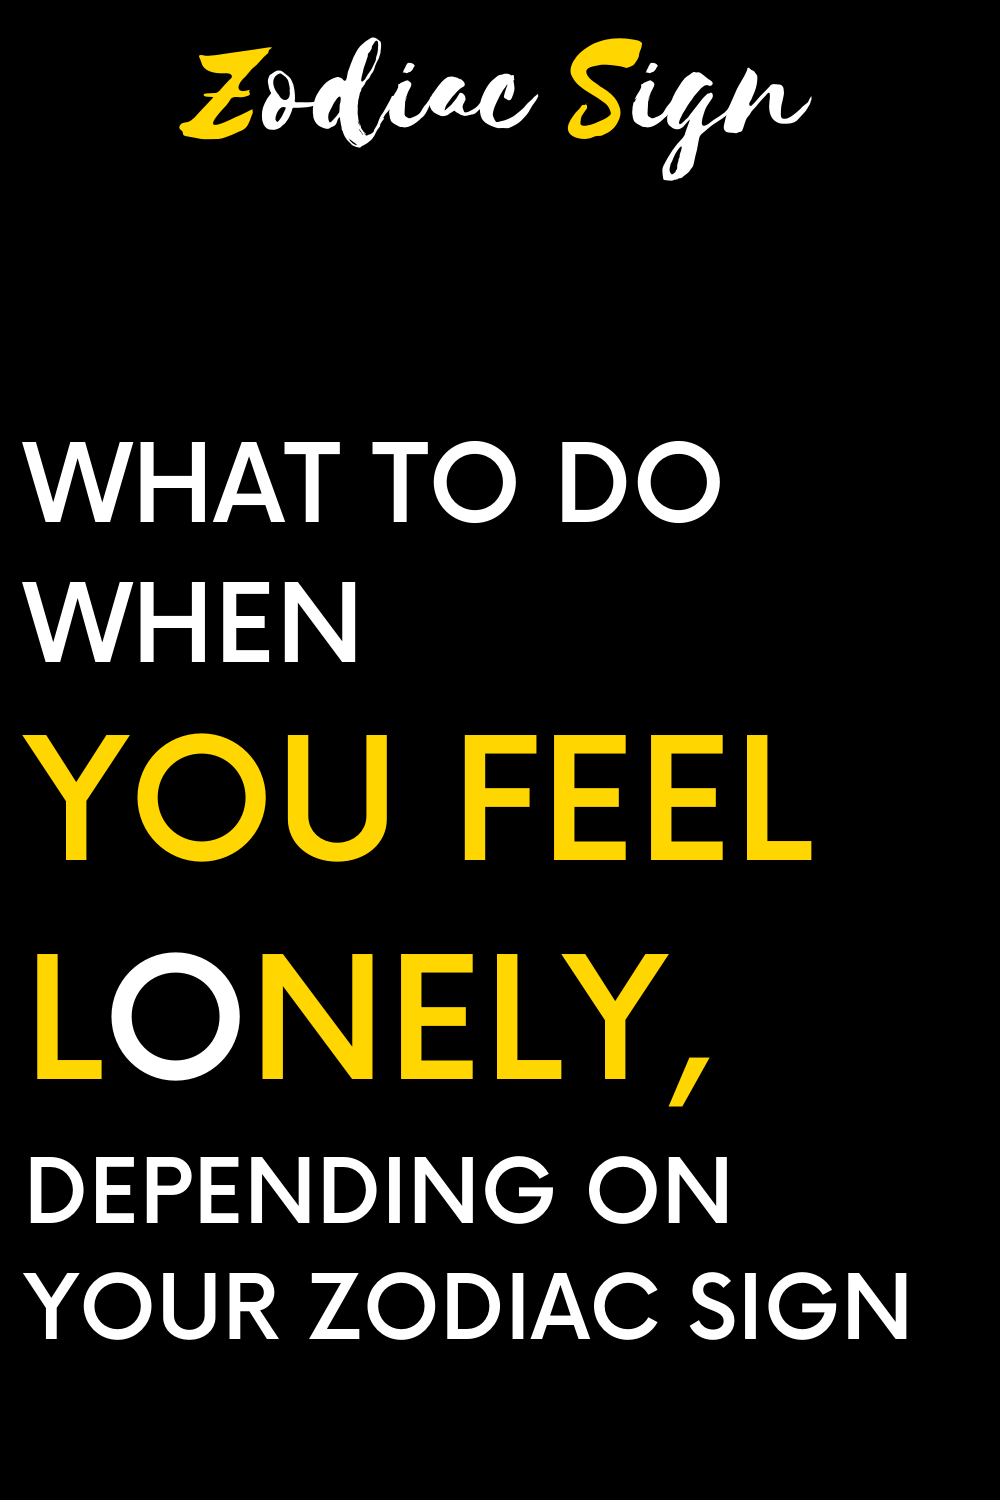 What to do when you feel lonely, depending on your zodiac sign